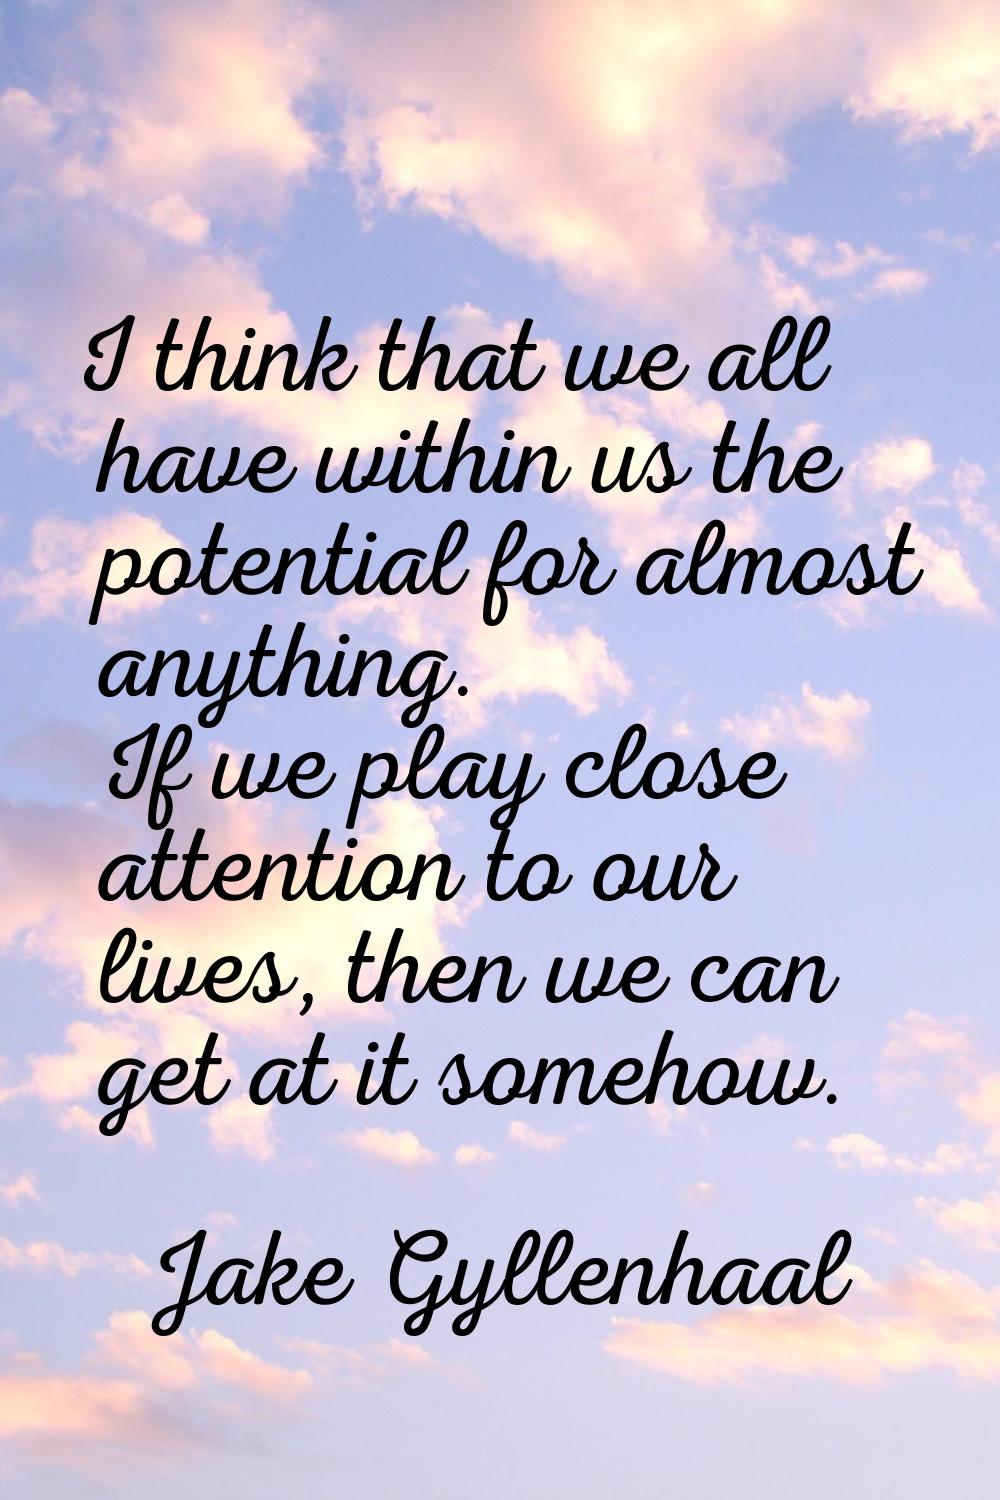 I think that we all have within us the potential for almost anything. If we play close attention to